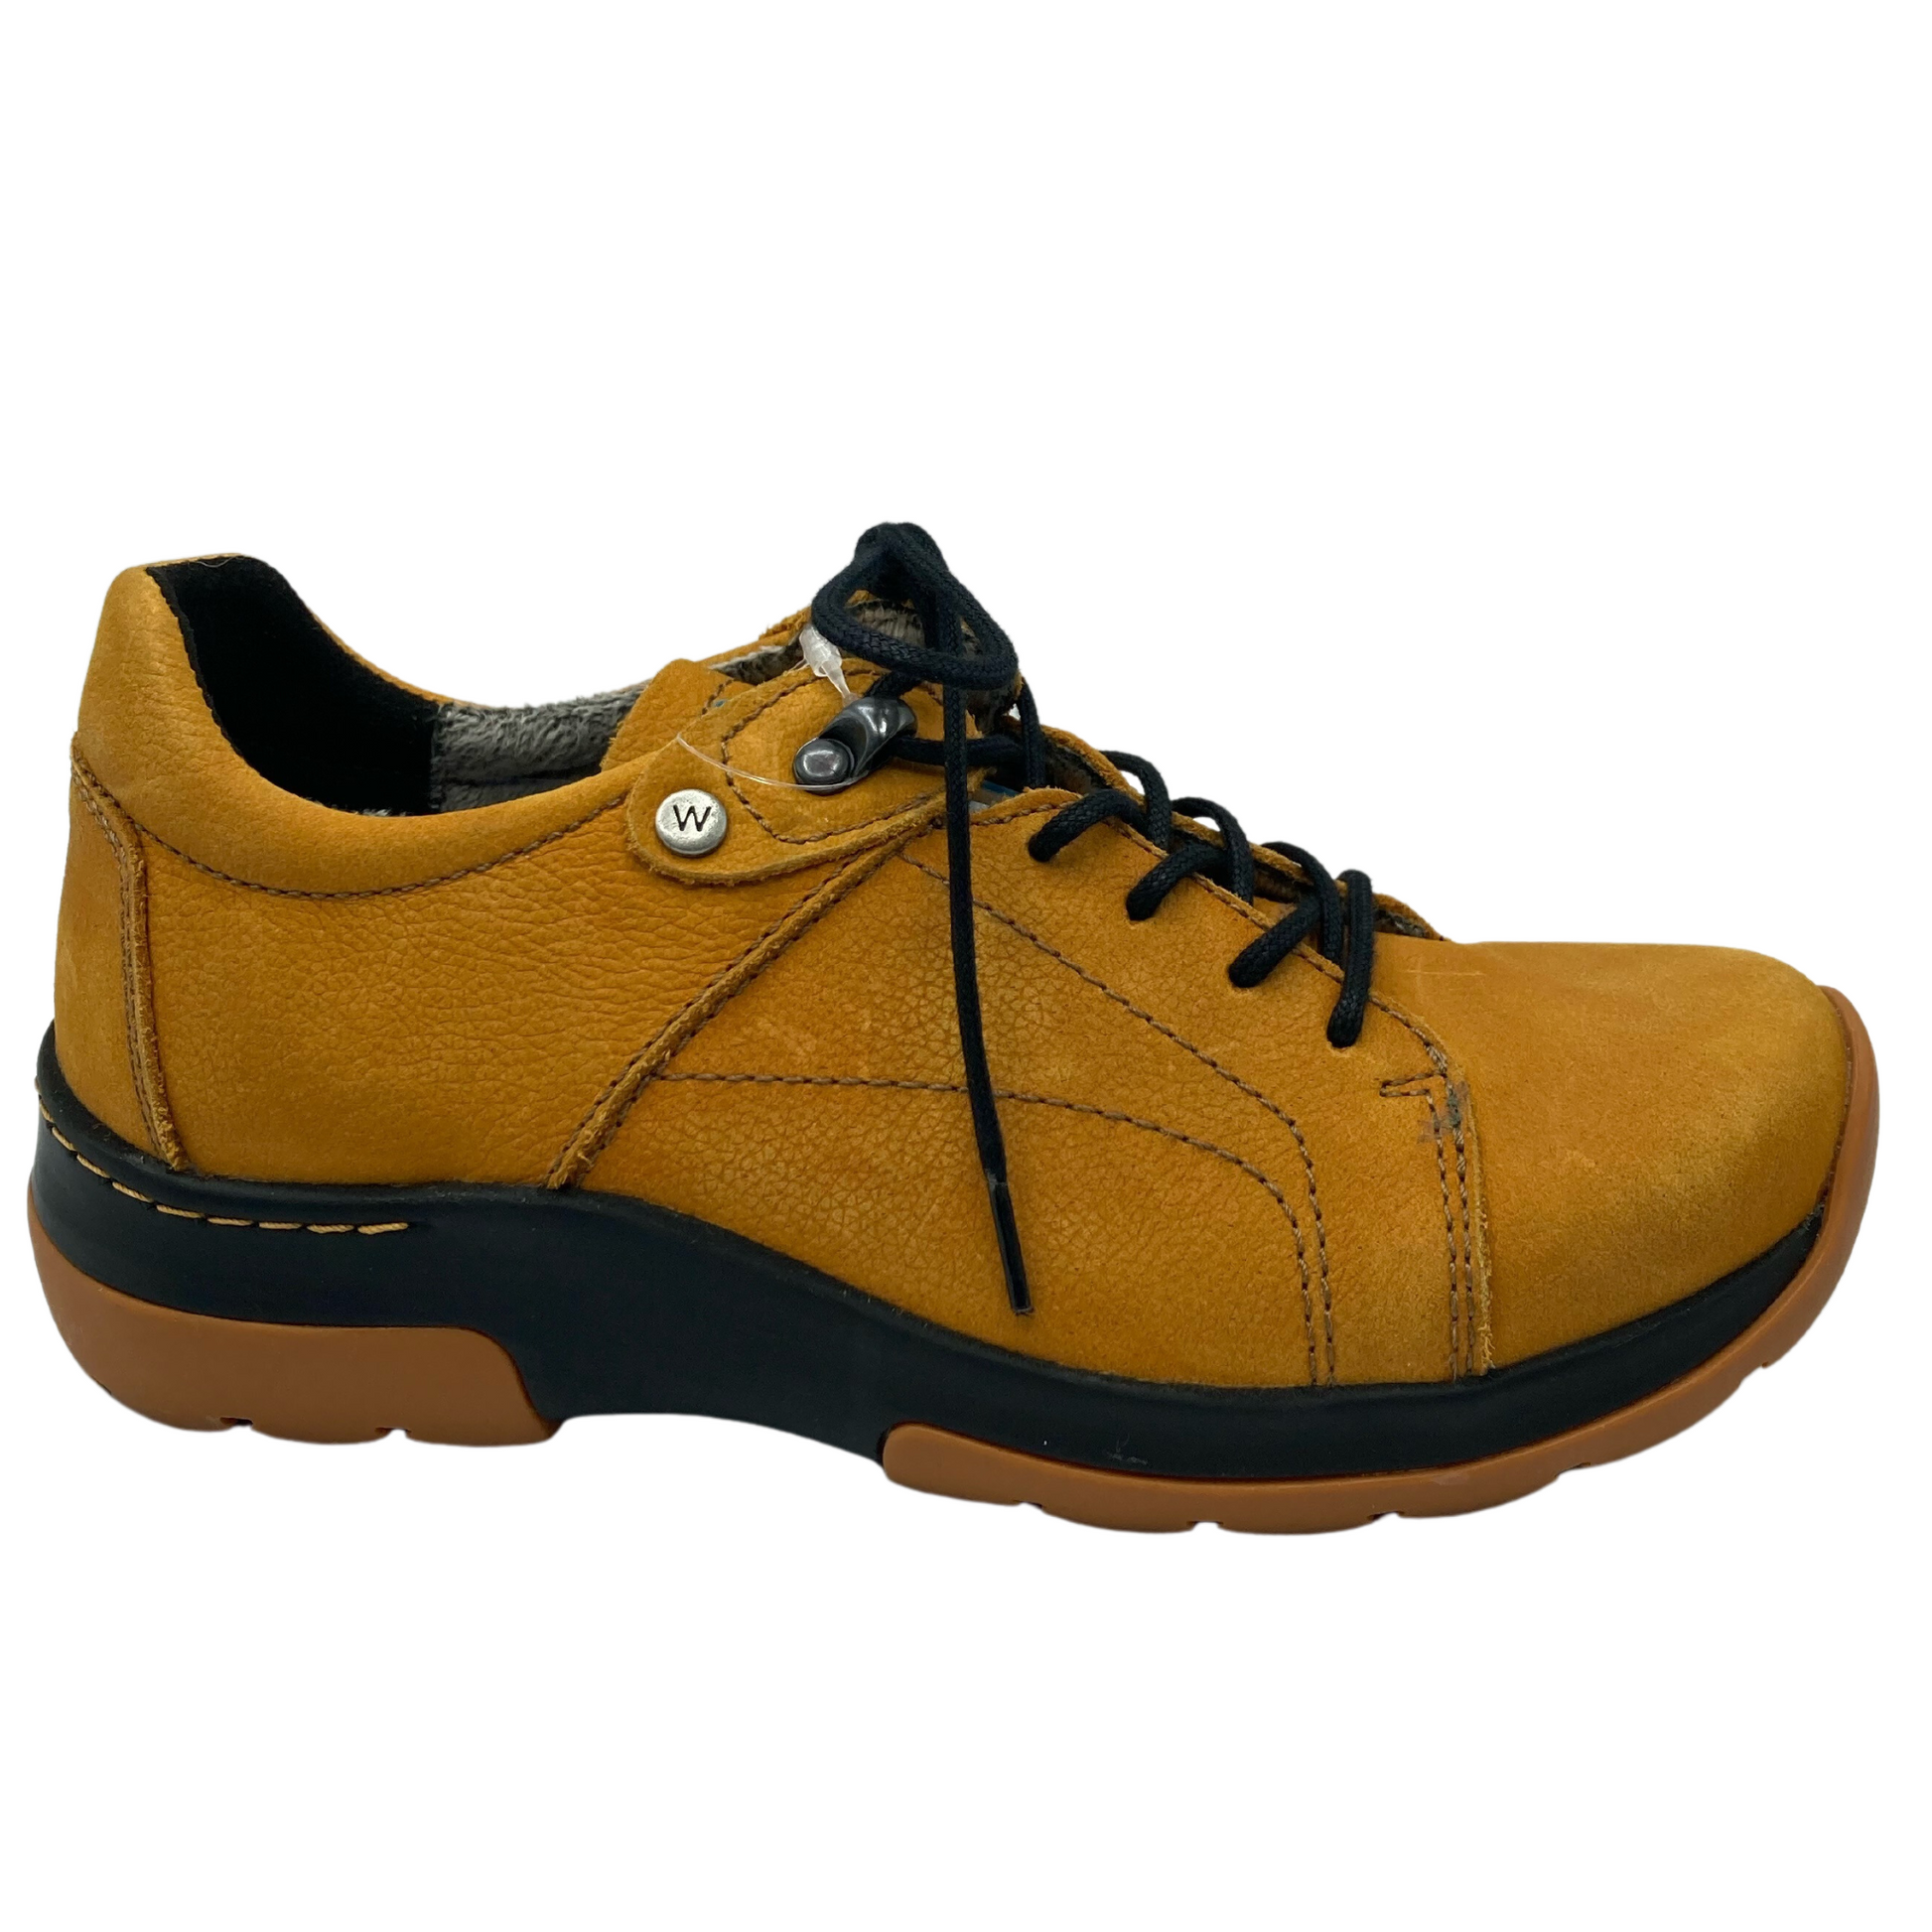 Right facing view of yellow leather sneaker with thick rubber outsole and black laces